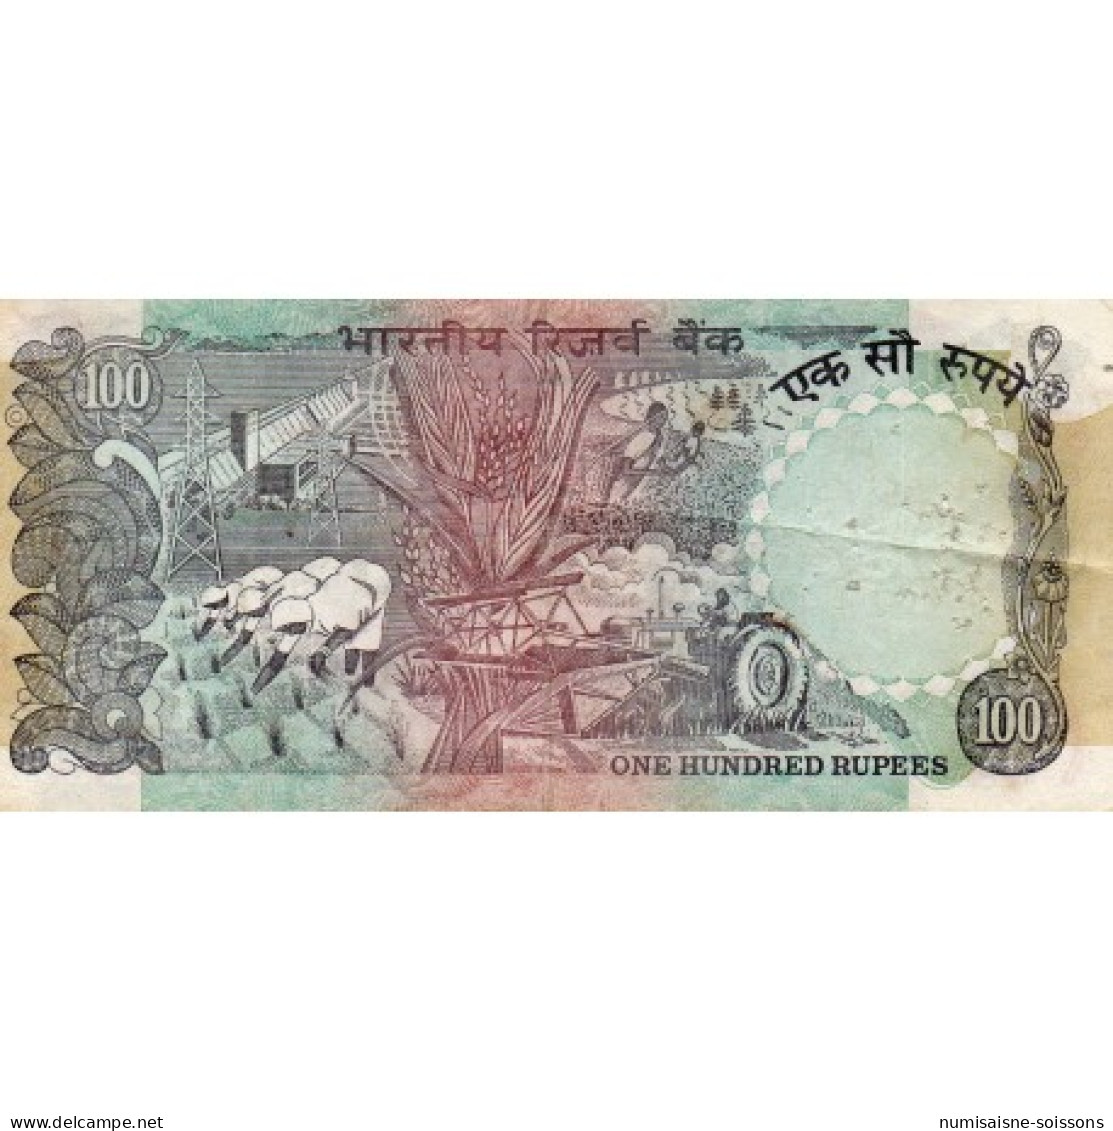 INDE - PICK 86 G - 100 RUPEES - NON DATE (1979) - LETTRE A - TTB - India